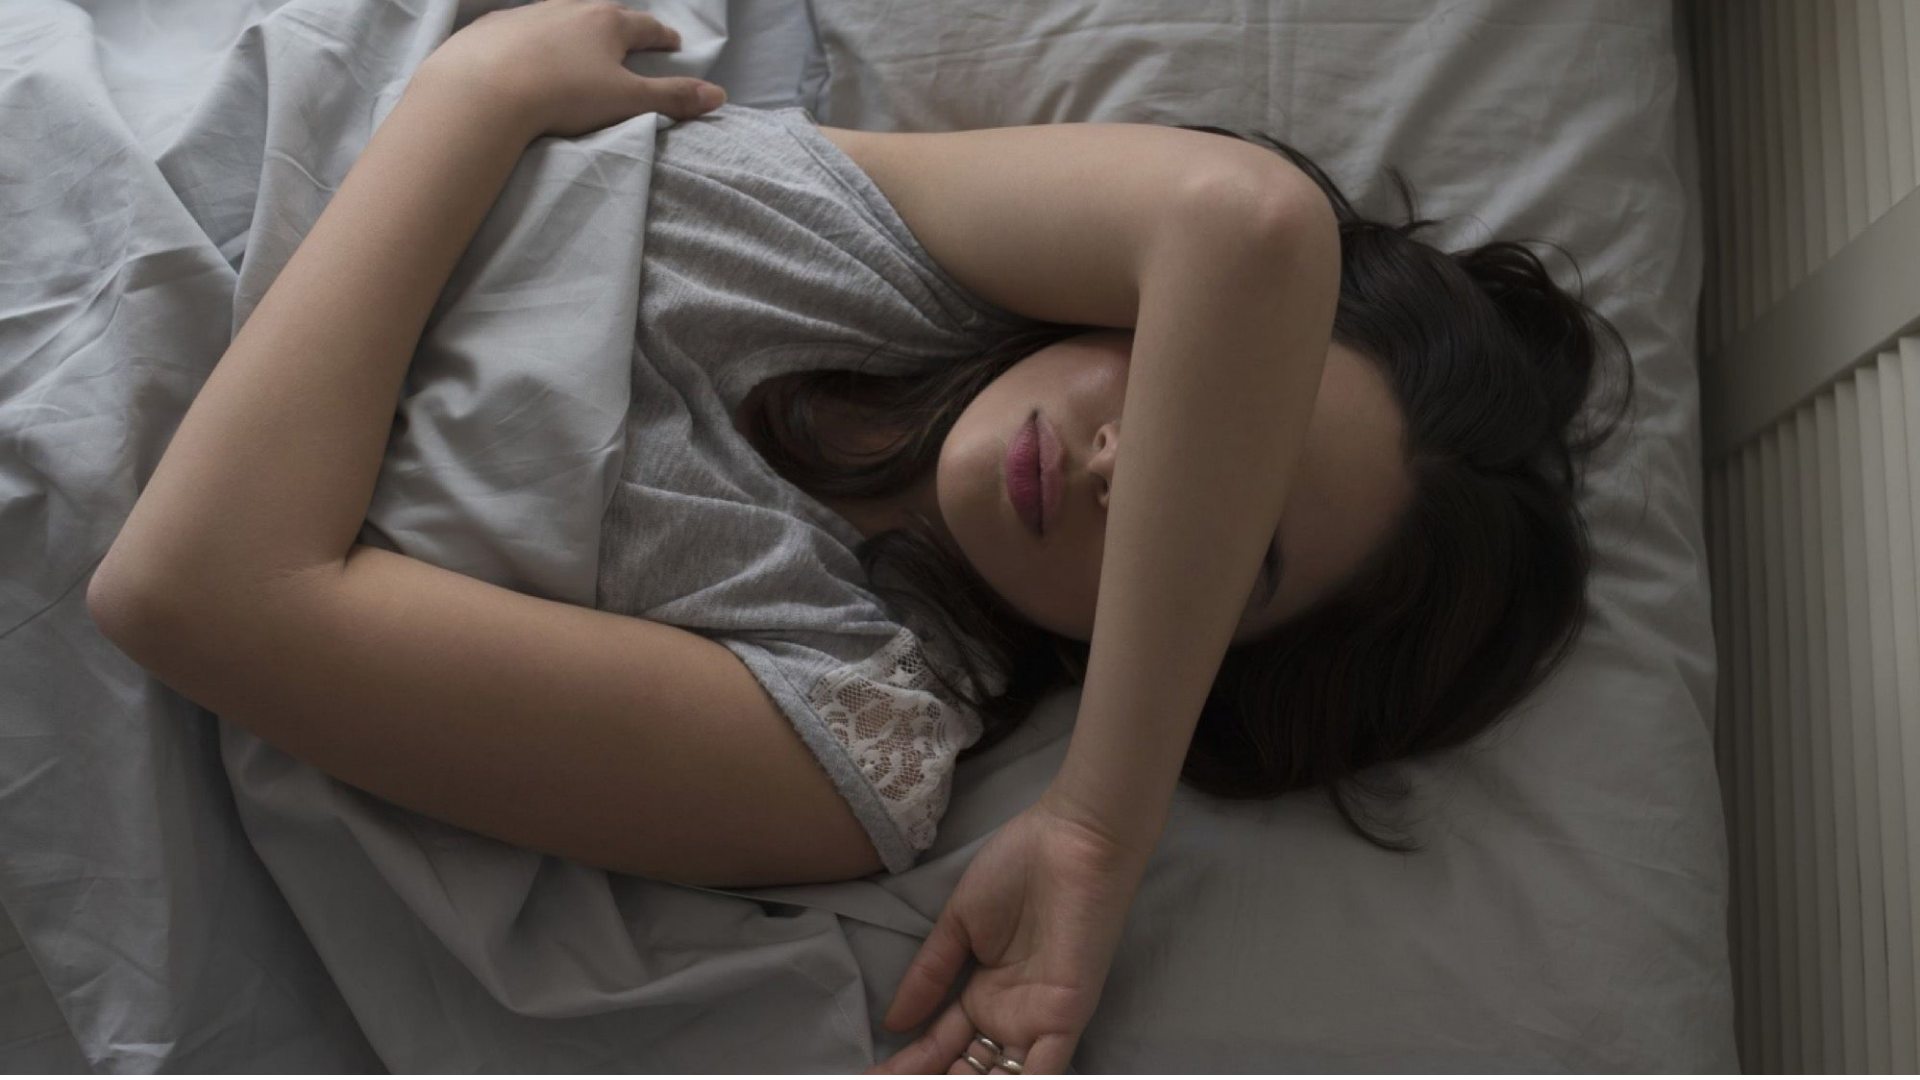 PH is experiencing the worst sleep crisis according to a research